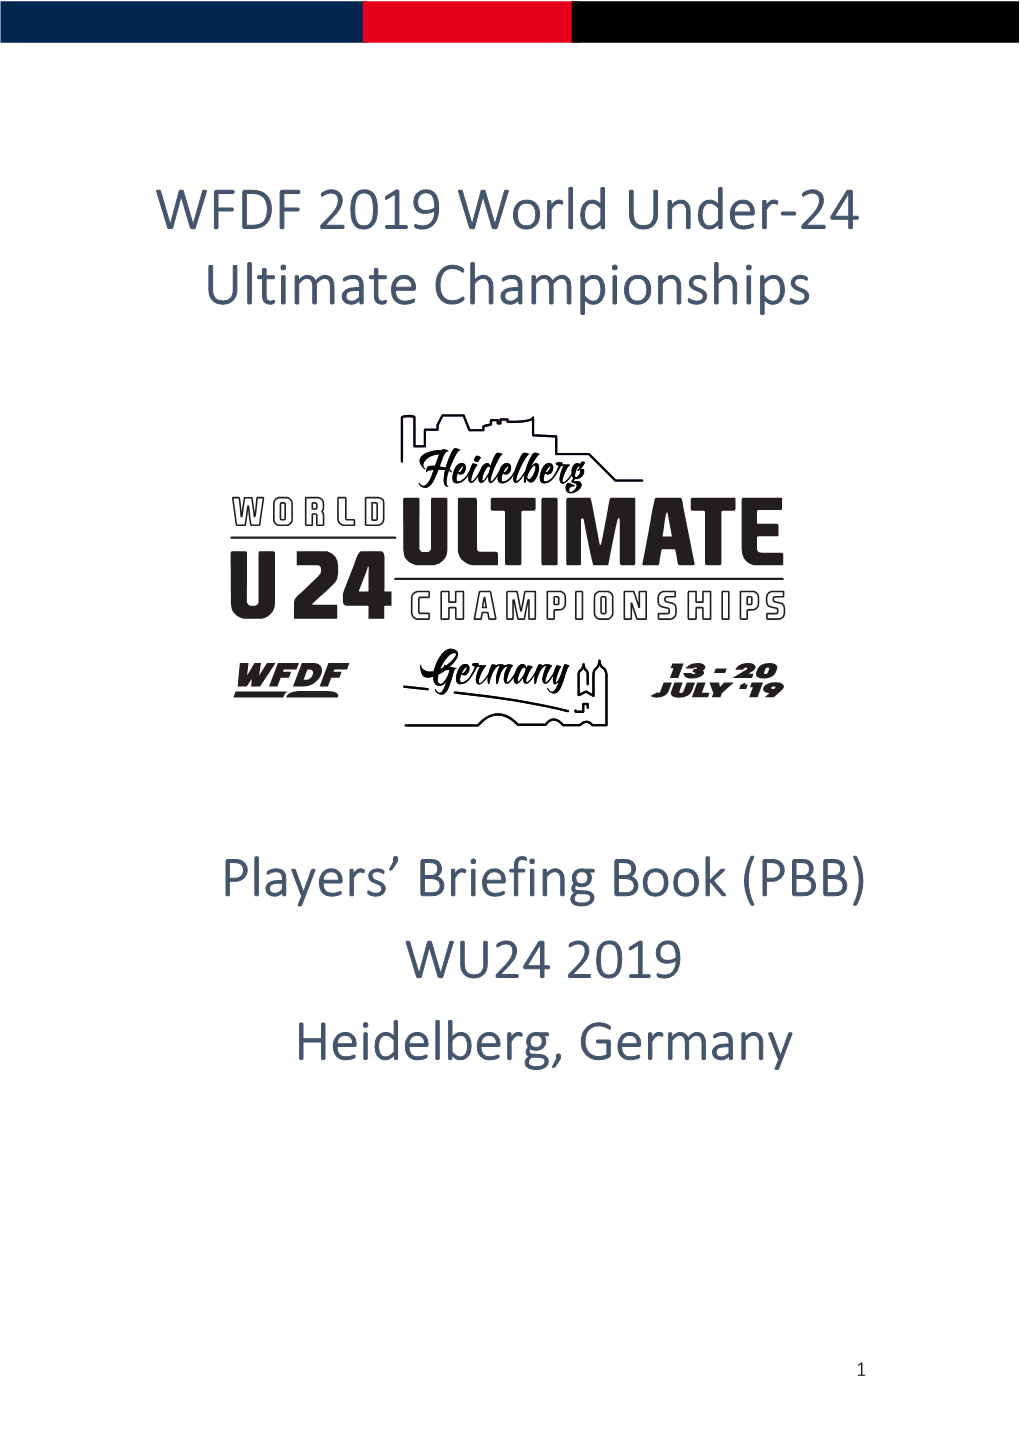 Players' Briefing Book (PBB)